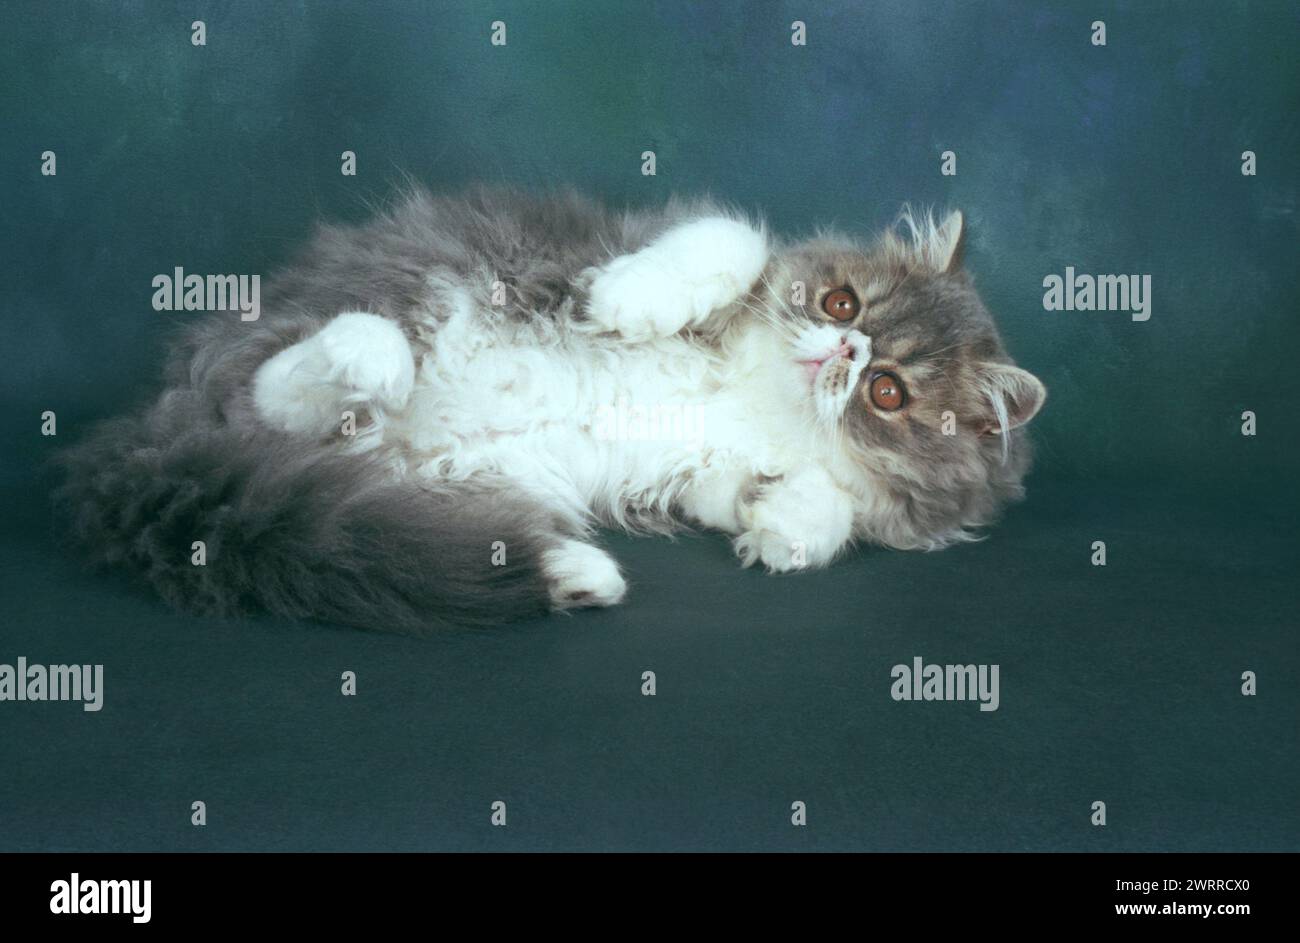 Persian Blue and White KItten Playing in the Studio on a Dark Background Stock Photo